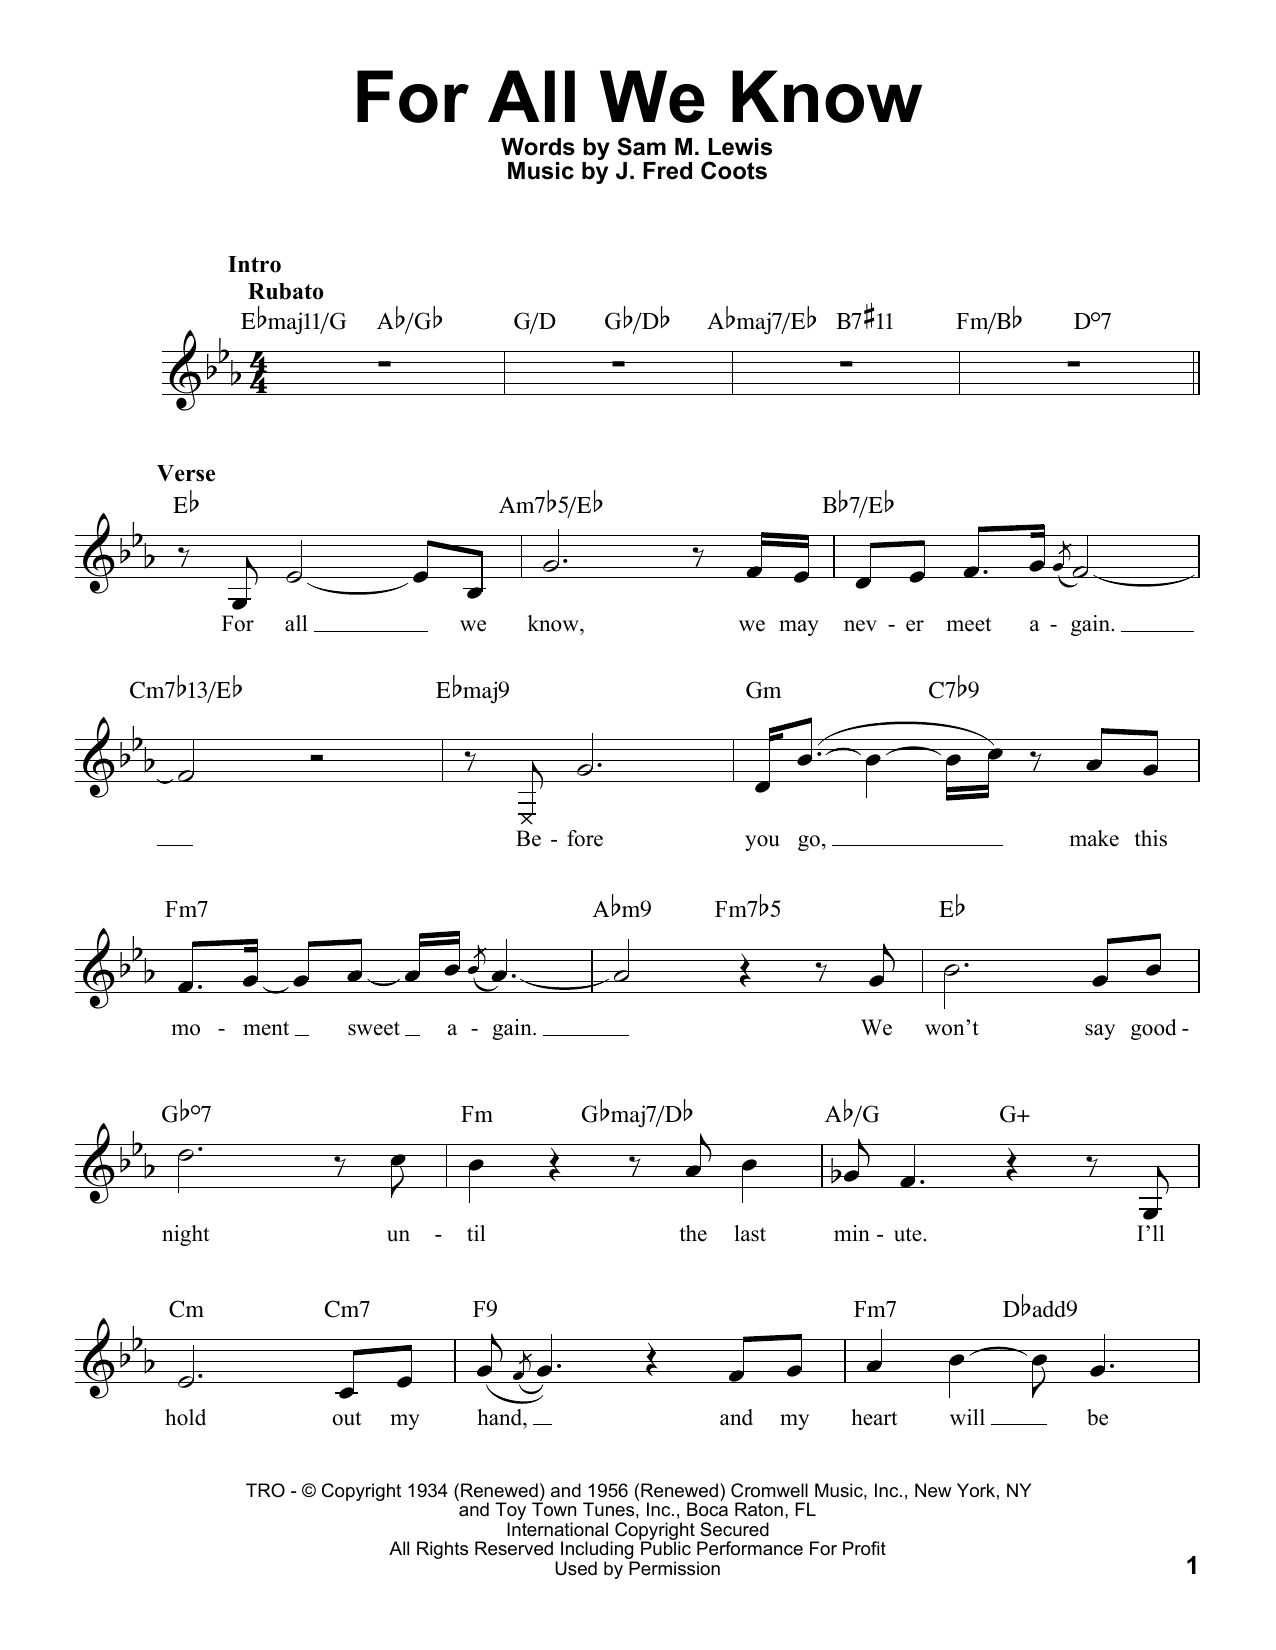 Download J. Fred Coots For All We Know Sheet Music